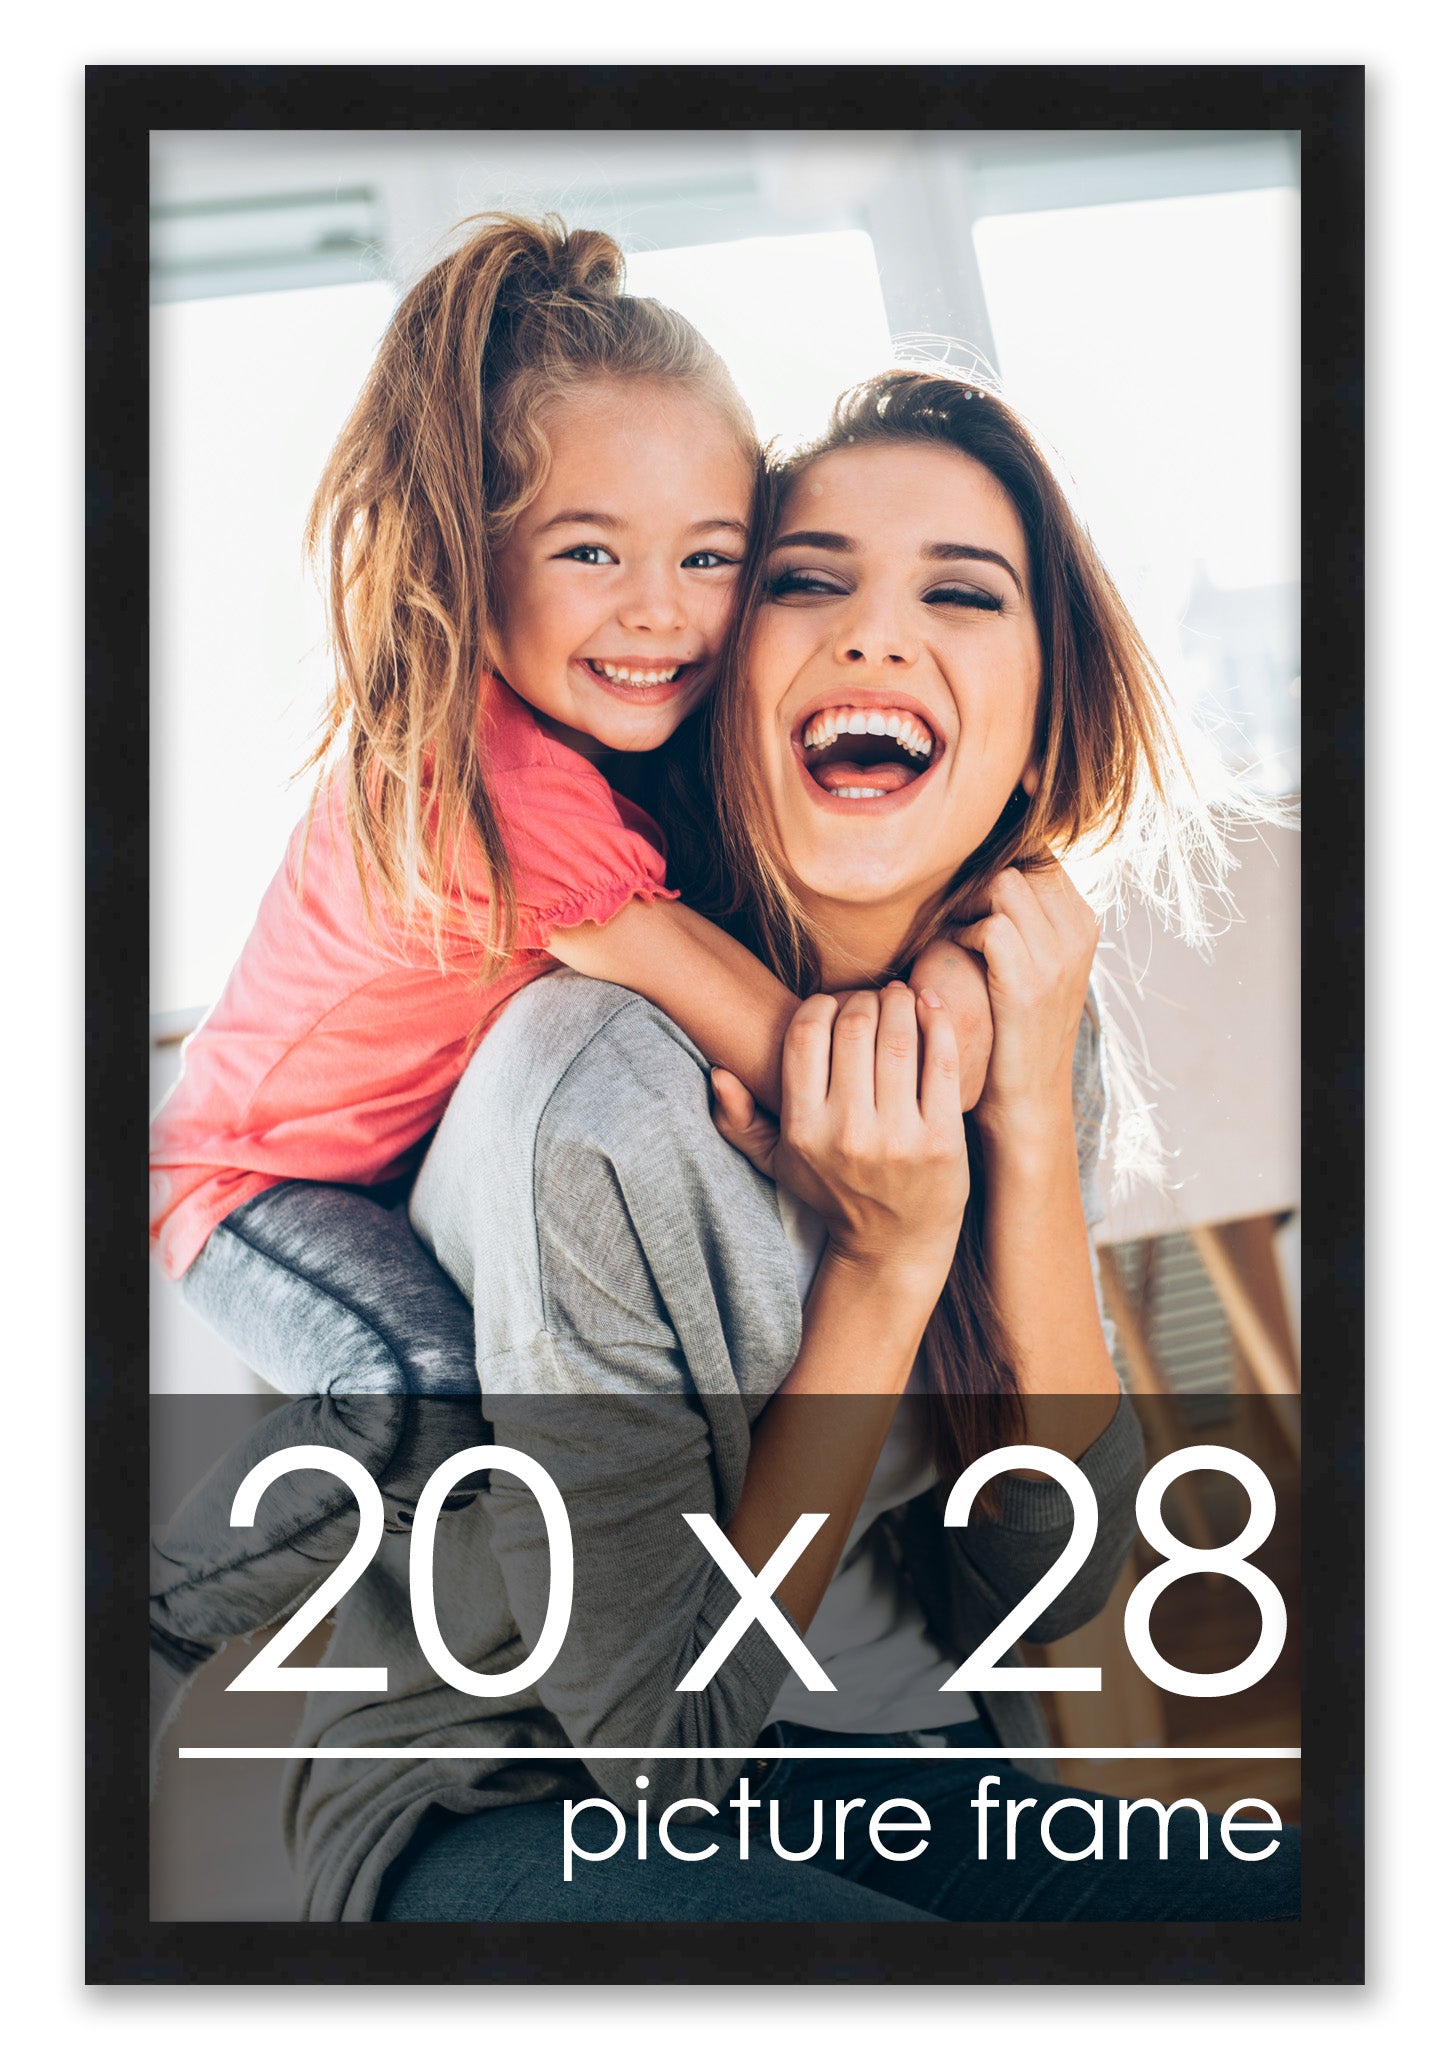 20x28 Picture Frame Black Solid Pine Wood 0.75 Inch Wide